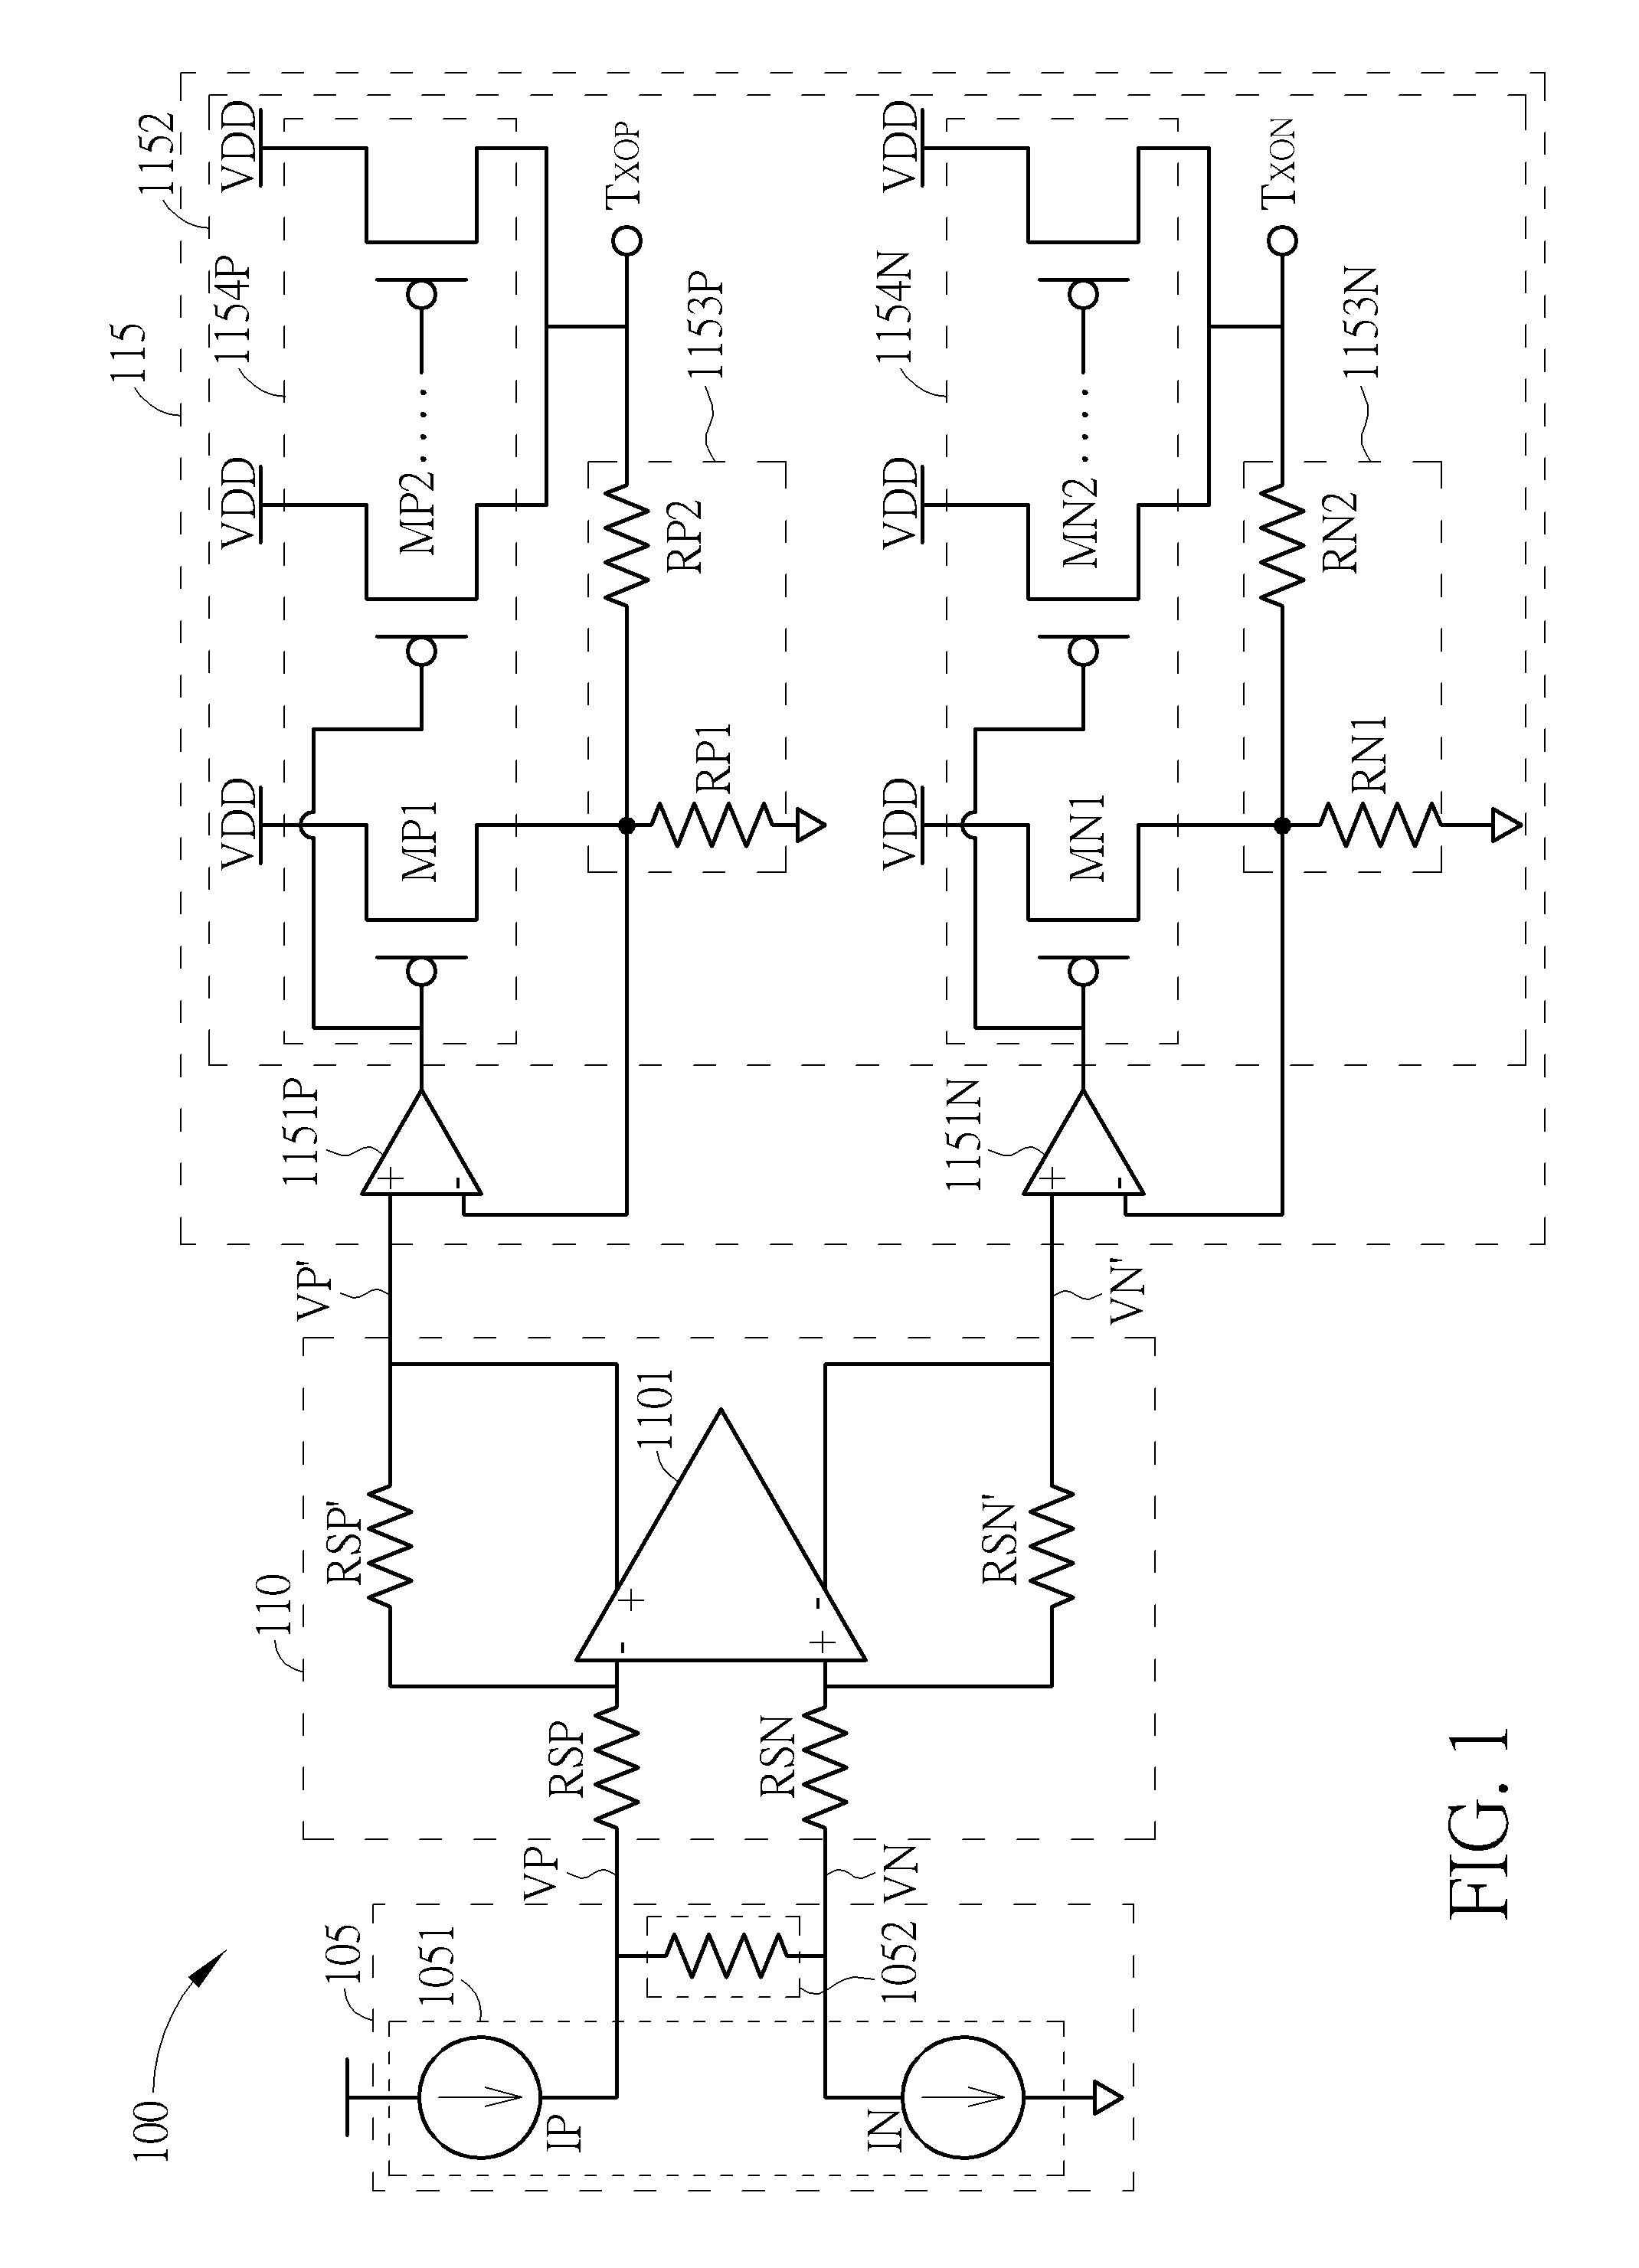 Driving circuit, driving apparatus, and method for adjusting output impedance to match transmission line impedance by using current adjustment